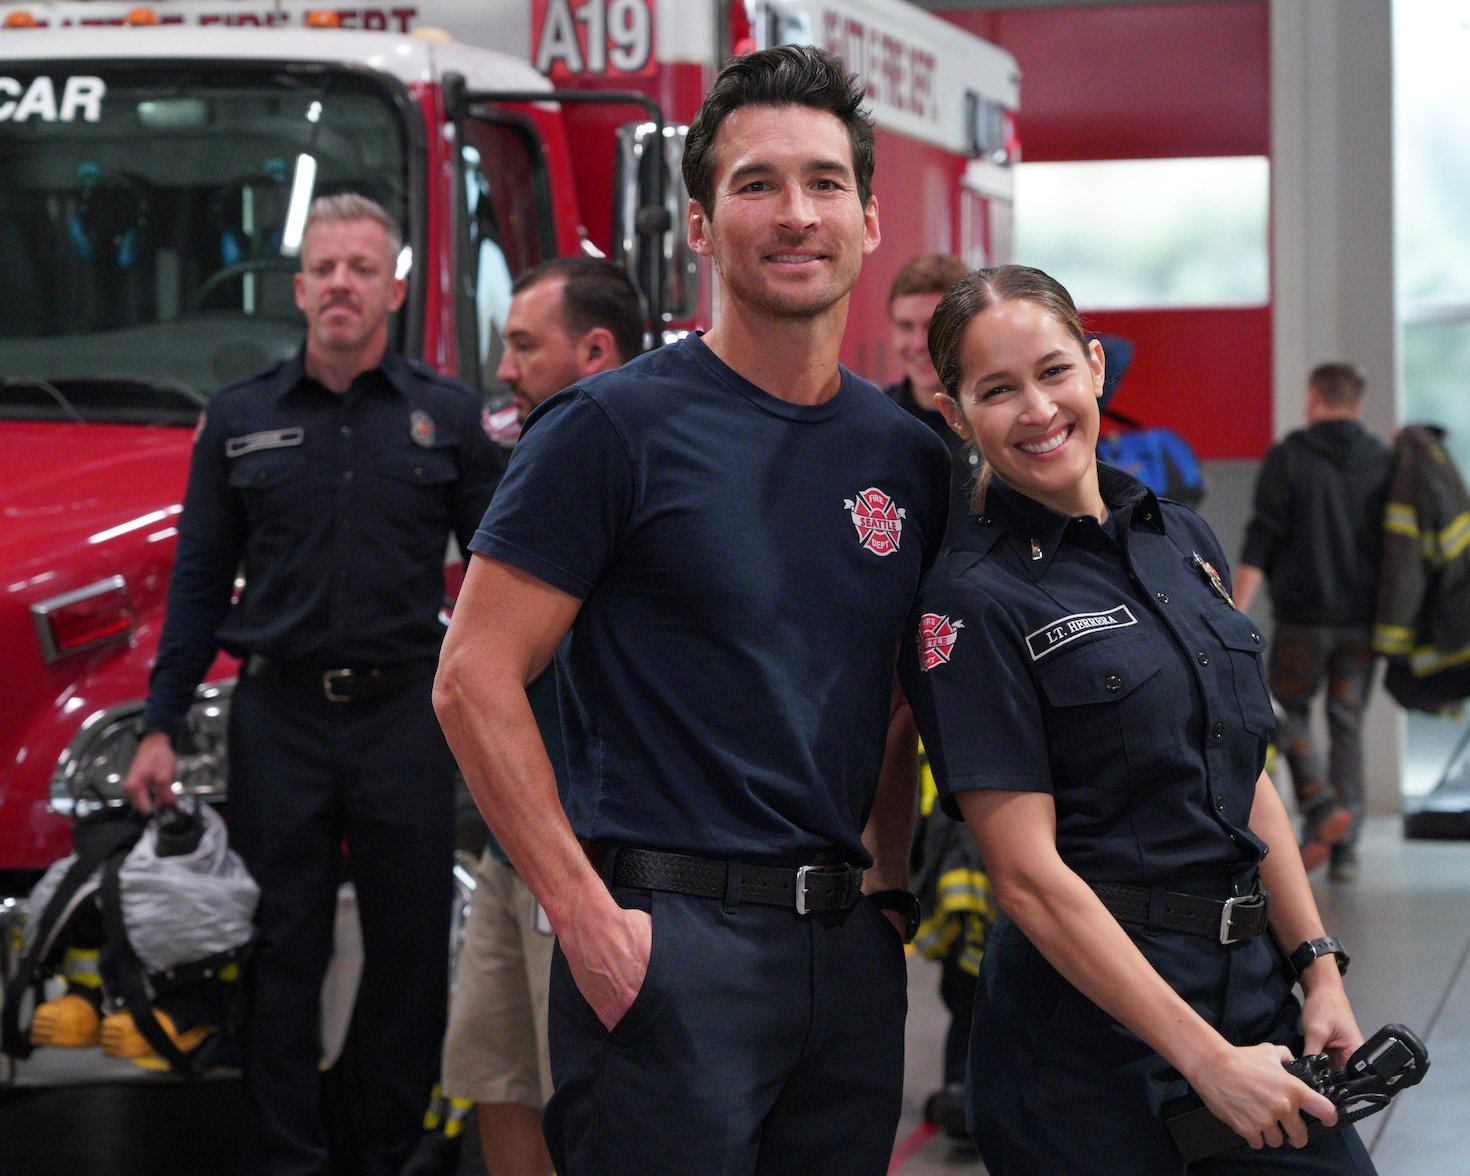 Station 19' Season 5: Official Release Date and How to Watch Premiere